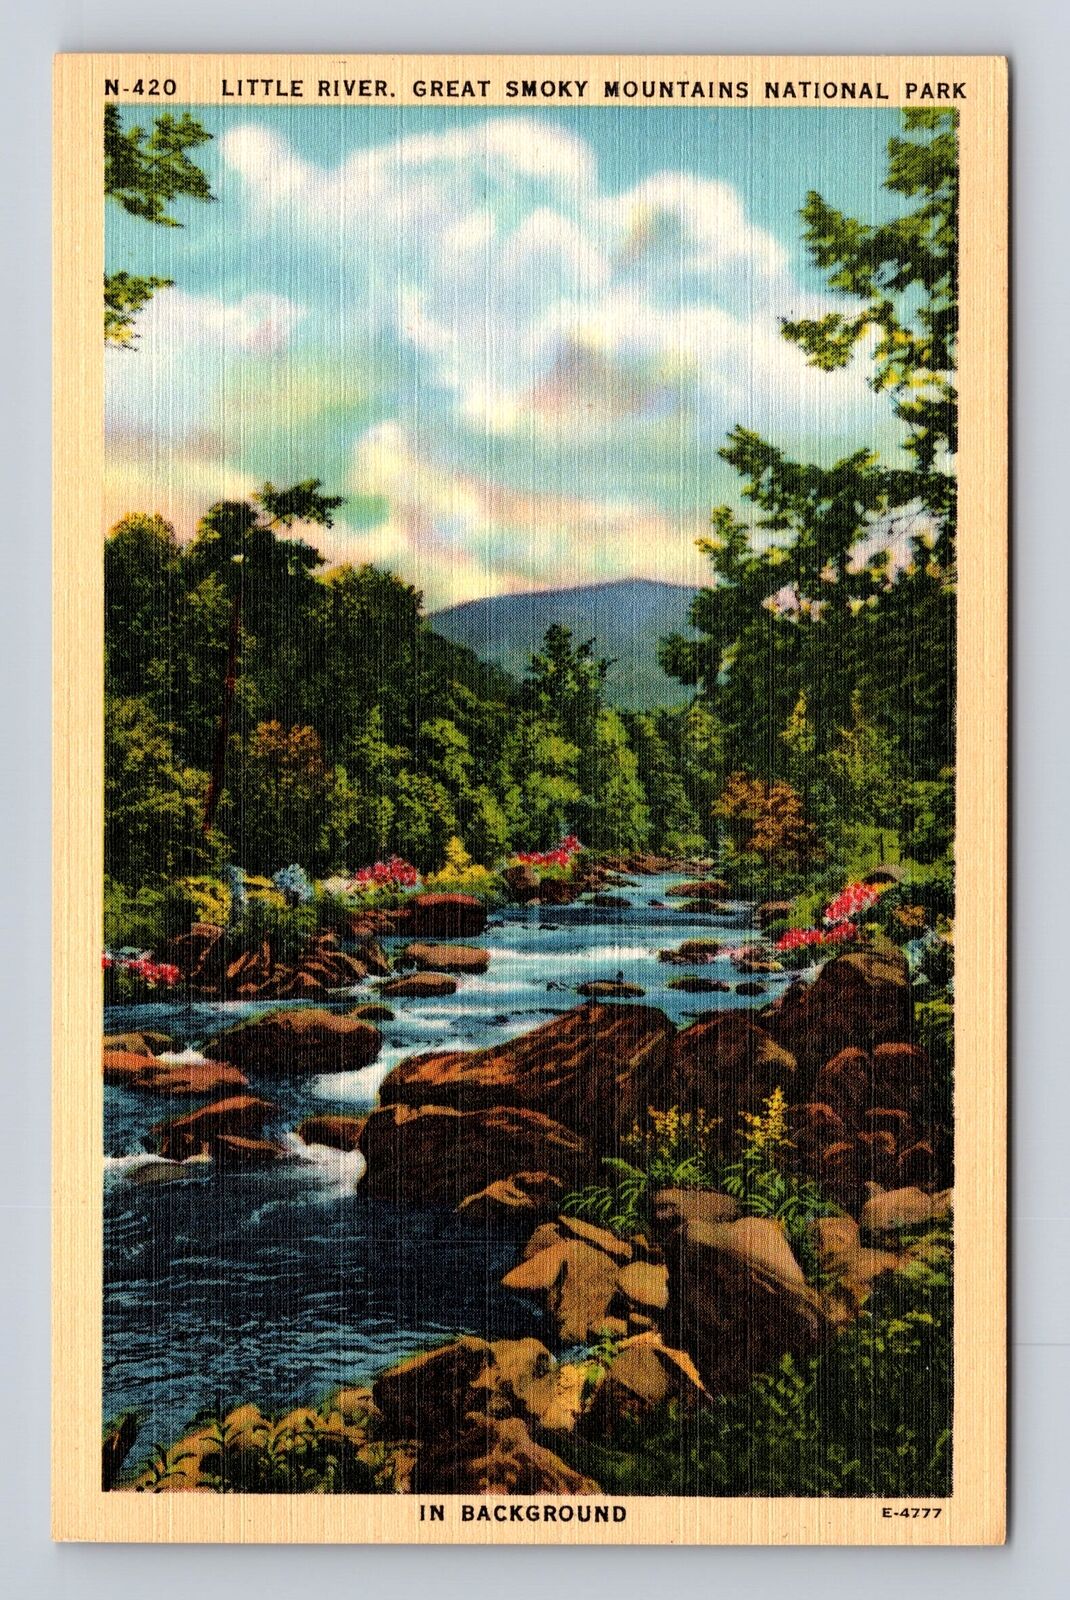 Great Smoky Mountains National Park, TN-Tennessee, Little River Vintage Postcard